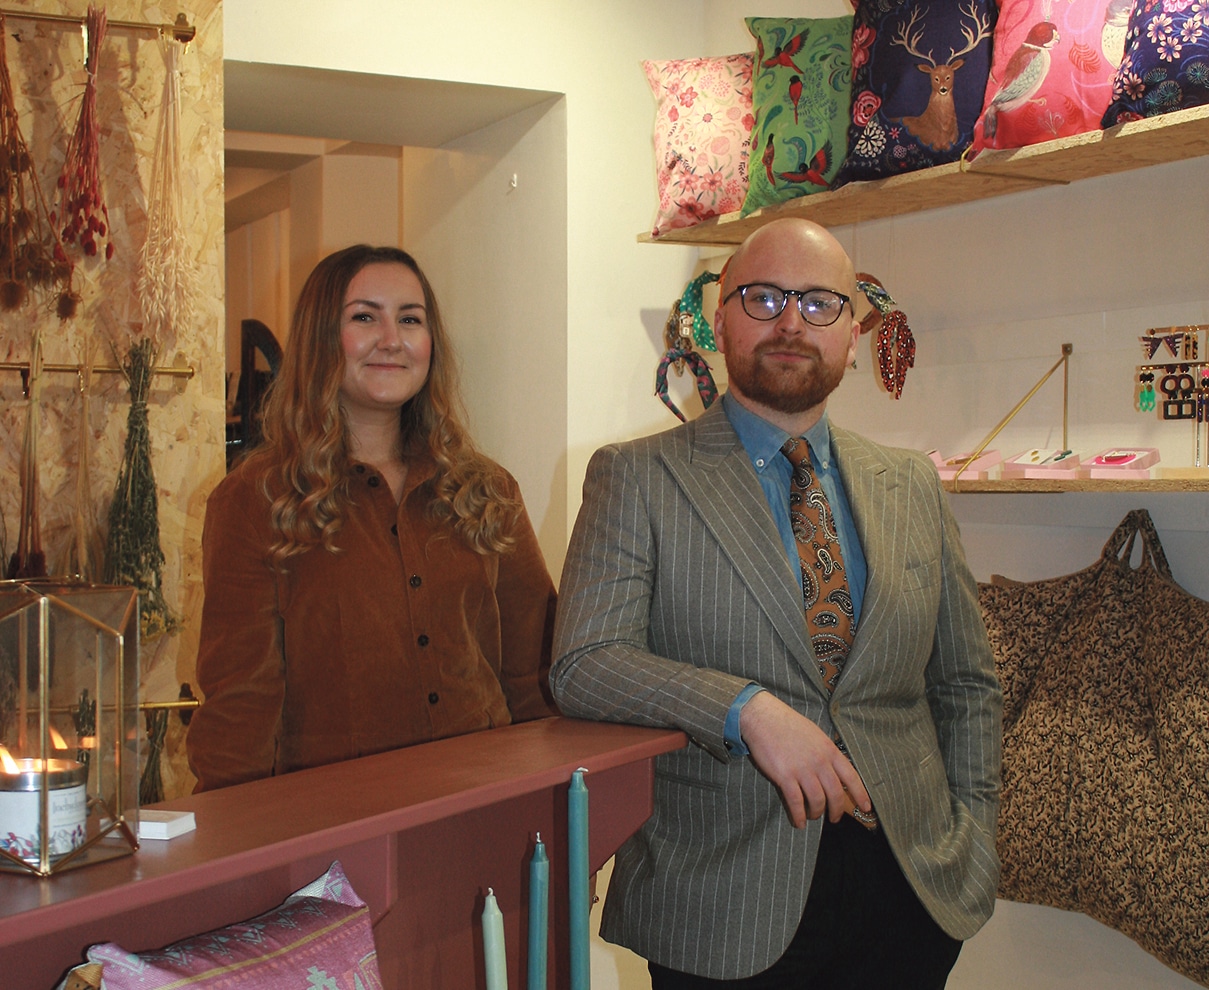 Hunter & Bloom is a stylish addition to Clonakilty’s retail experience